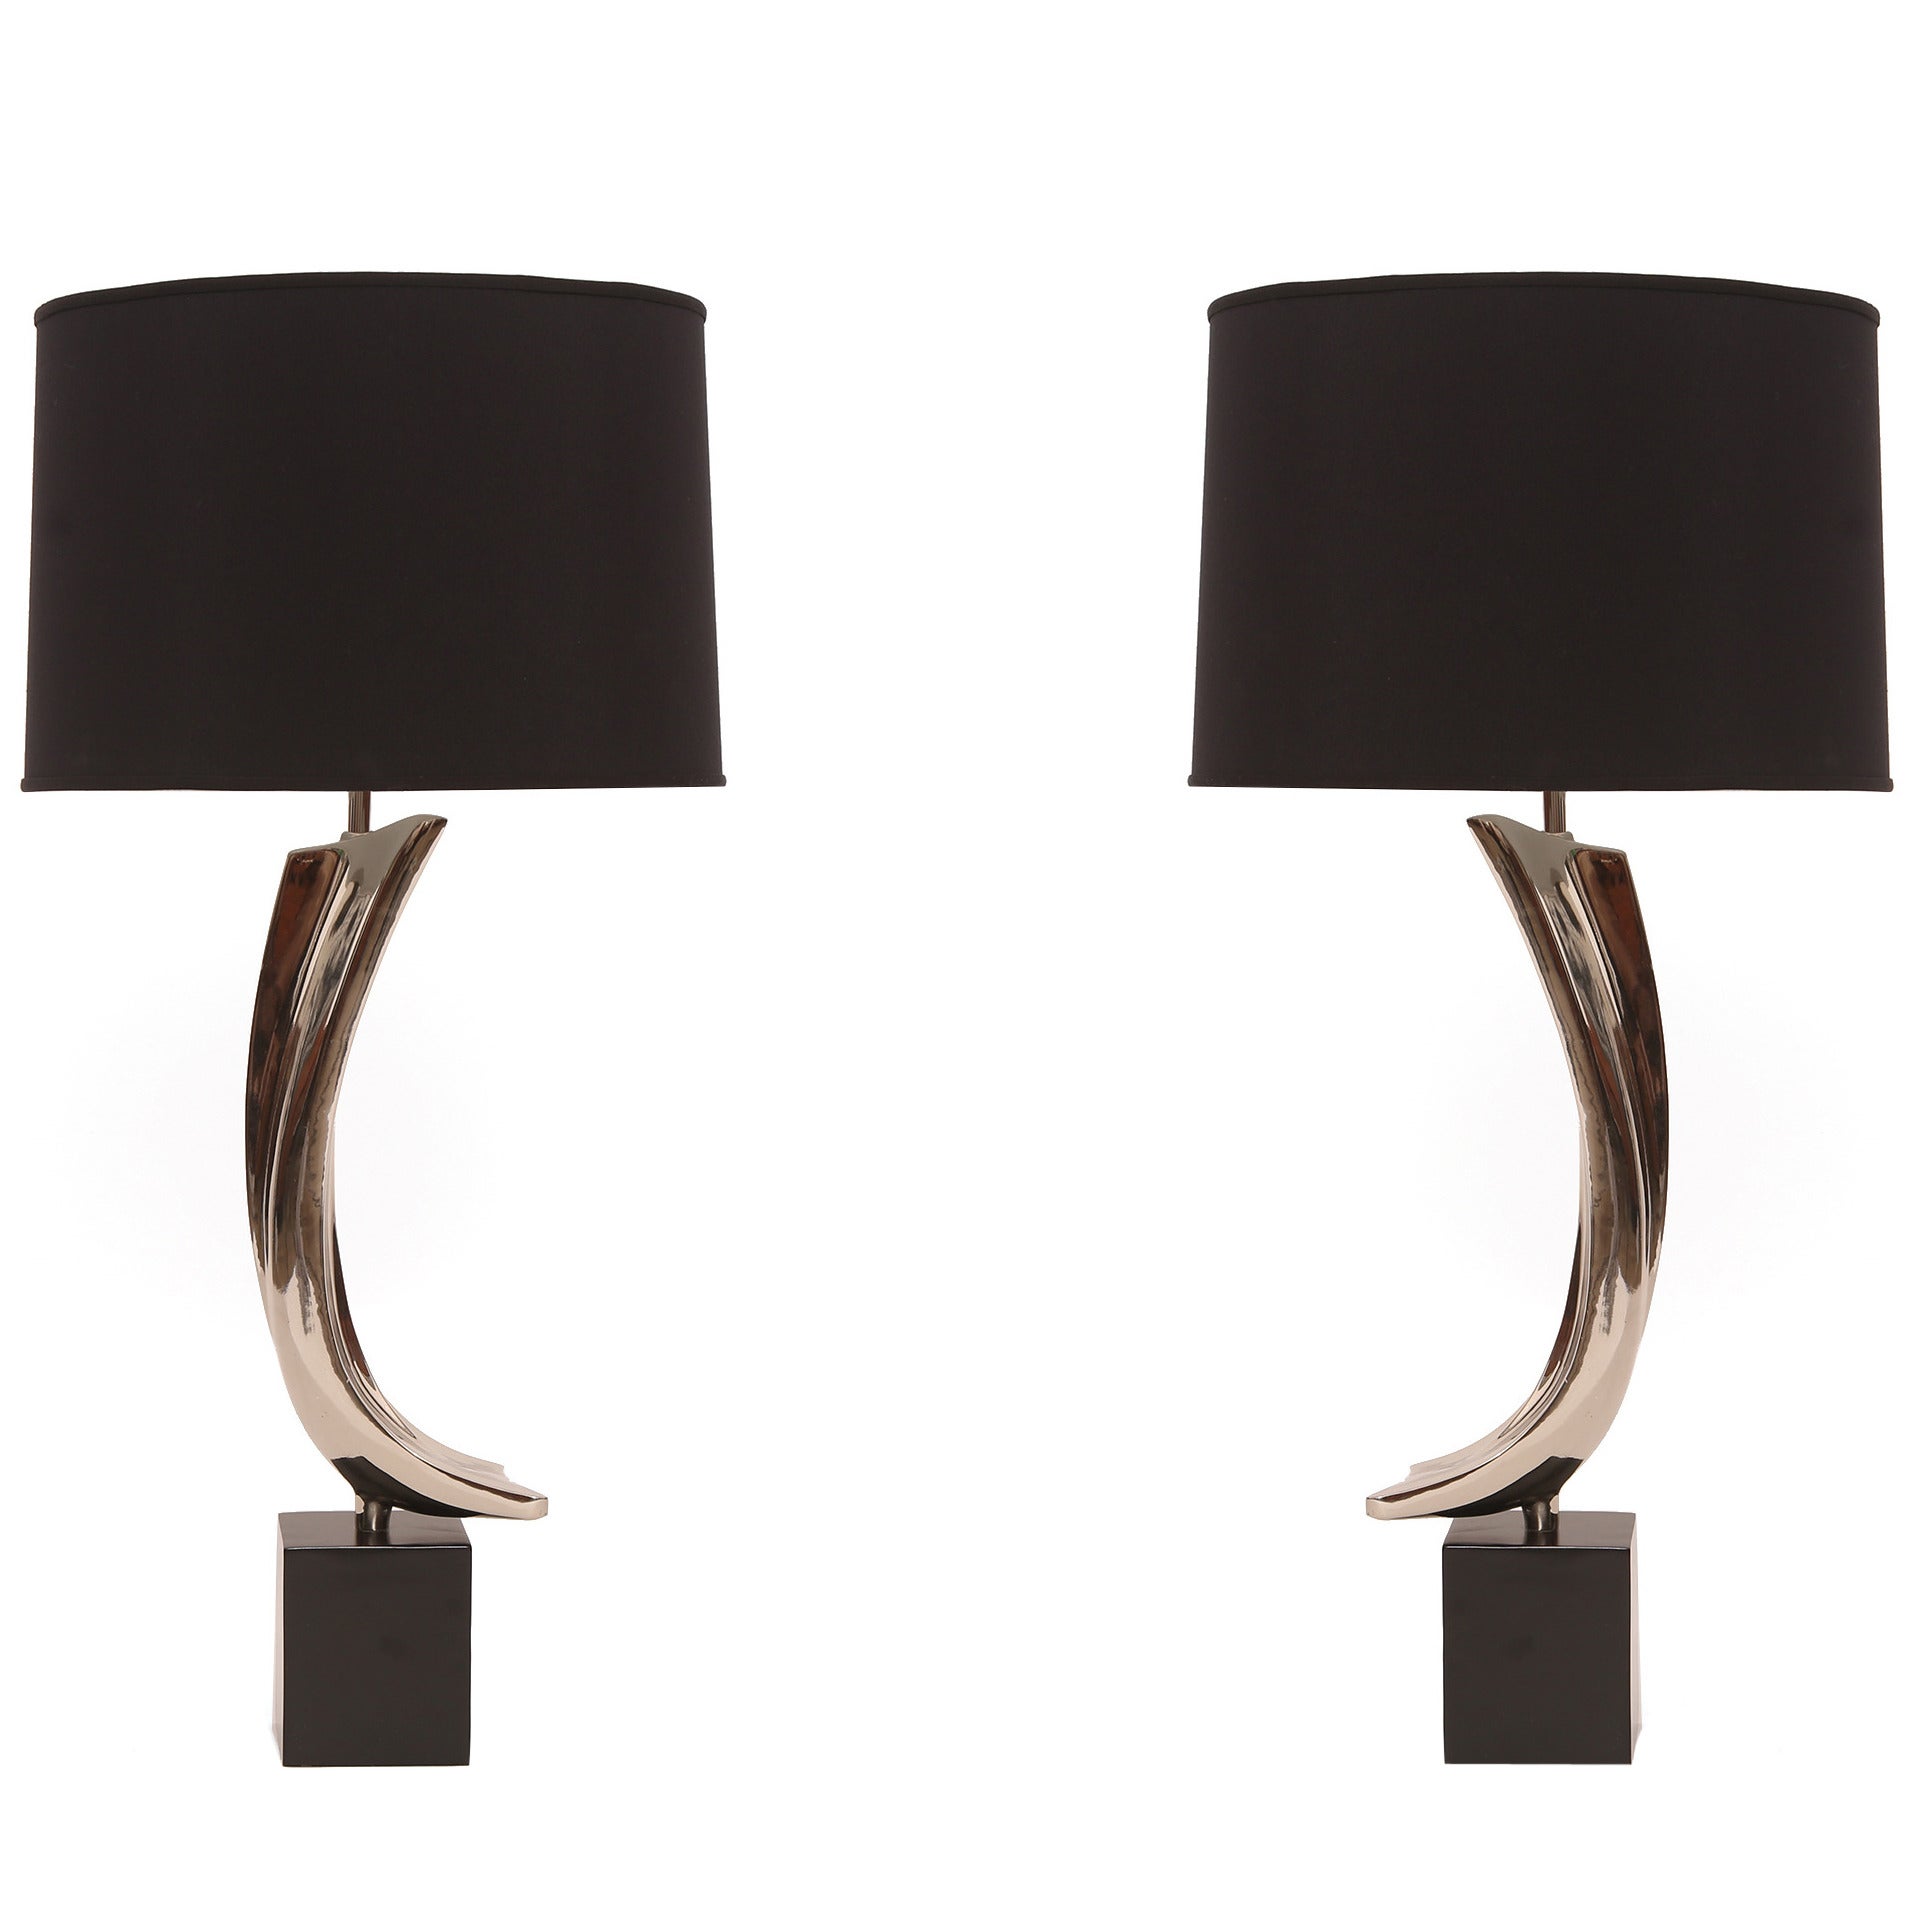 Sculptural Pair of Polished Chrome Lamps by Laurel